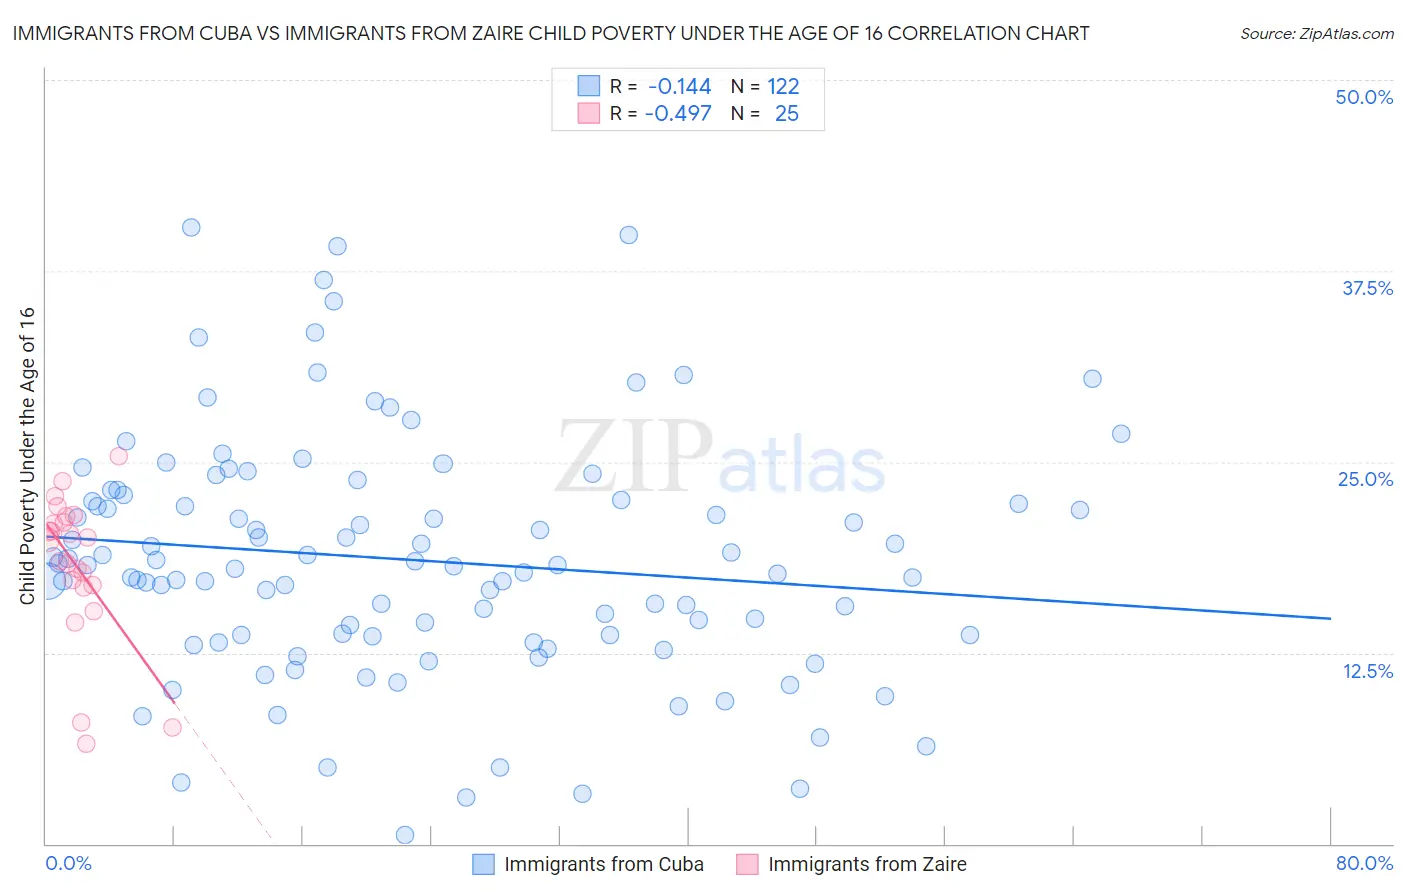 Immigrants from Cuba vs Immigrants from Zaire Child Poverty Under the Age of 16